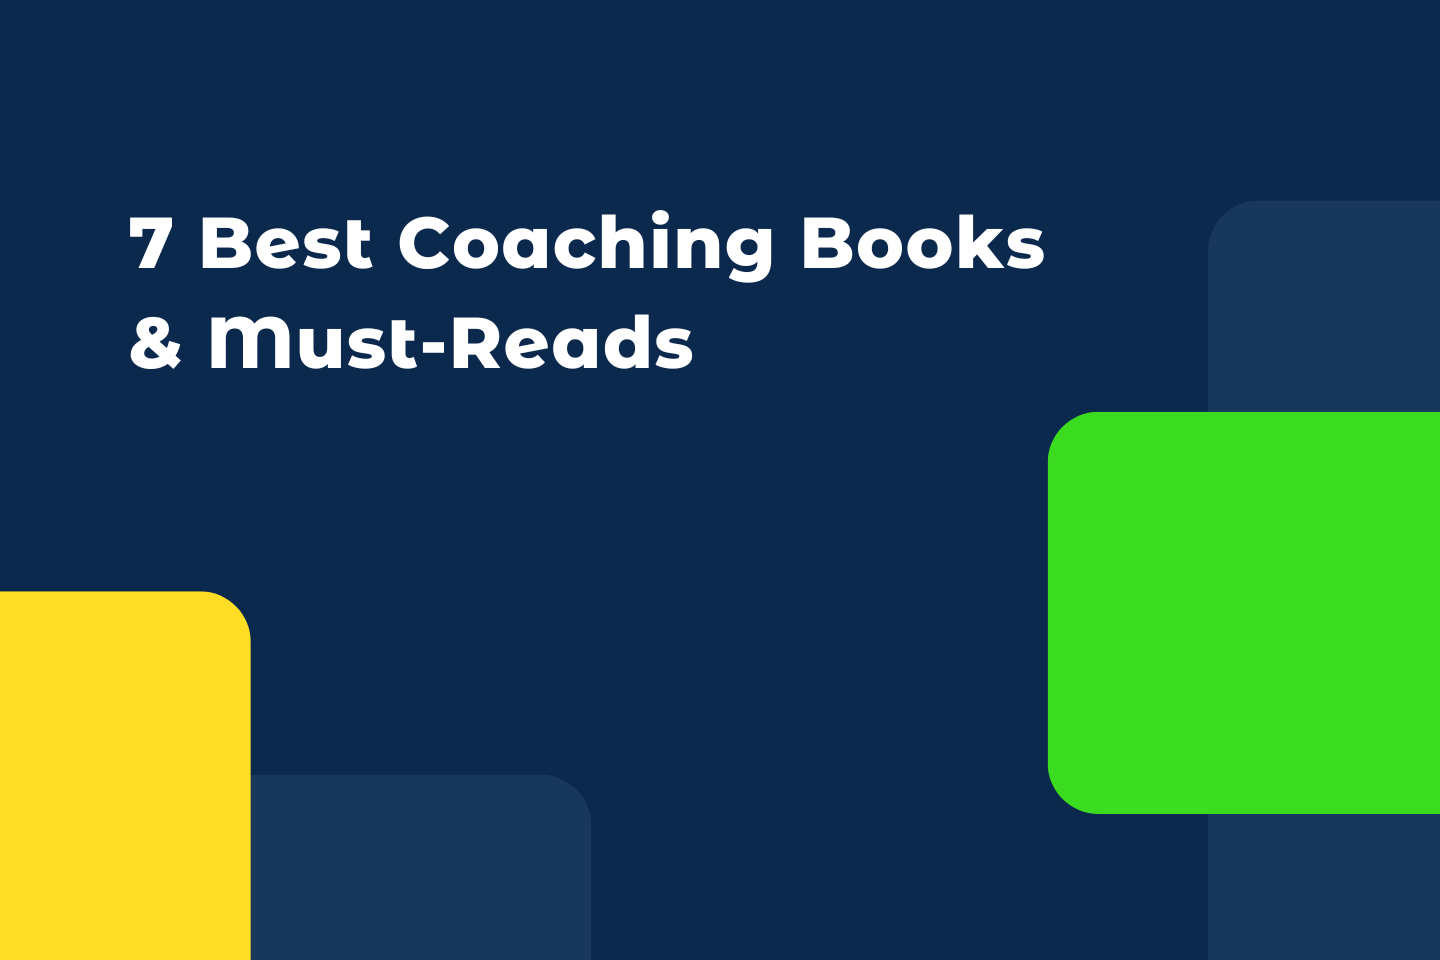 7 Best Coaching Books & Must-Reads for Aspiring and Established Coaches